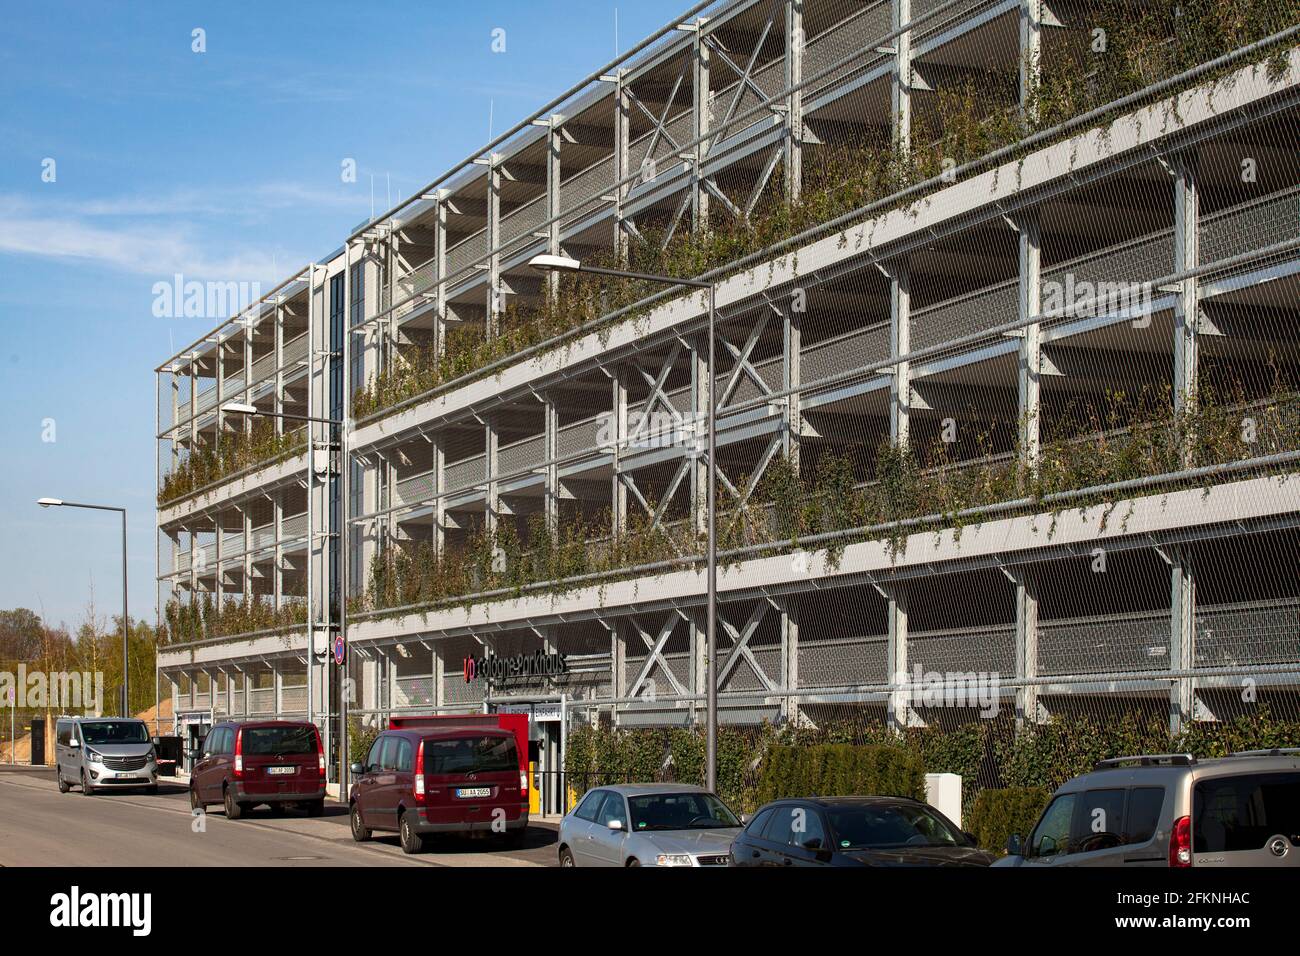 parking garage on Peter-Huppertz street in the I/D Cologne quarter in the district Muelheim, the facade is planted with about 5000 plants on 2000 squa Stock Photo